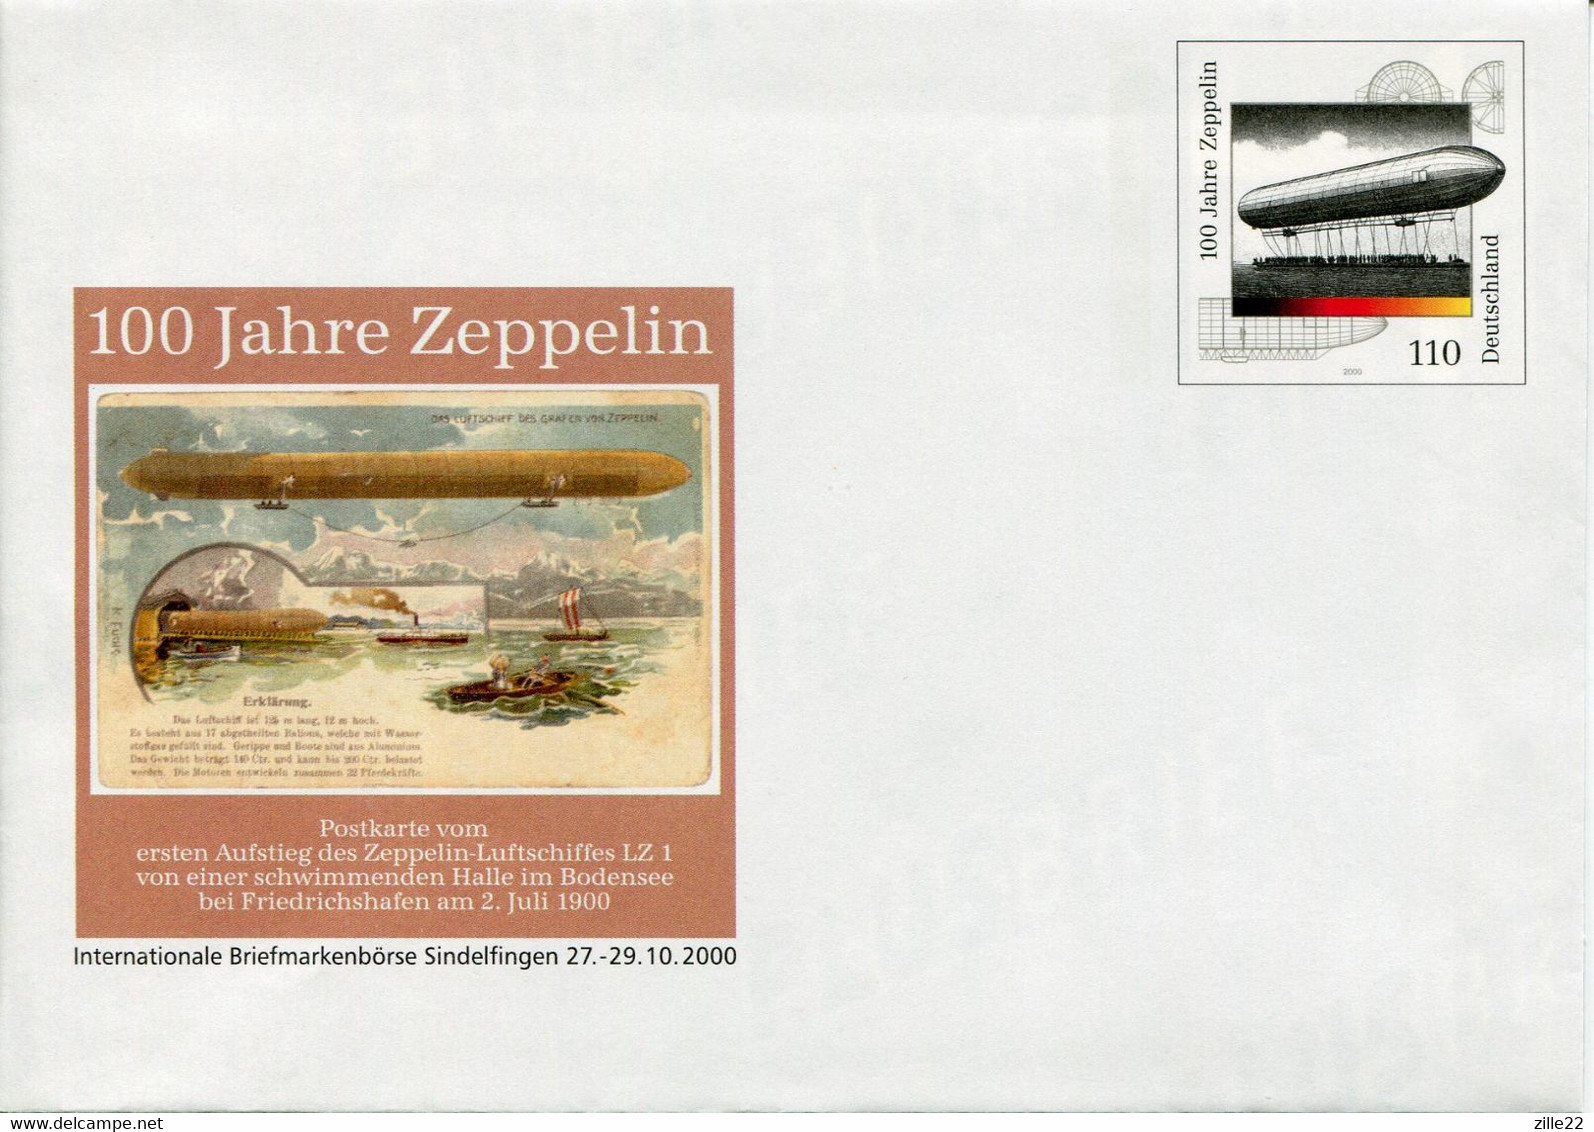 Germany Deutschland Postal Stationery - Cover - Zeppelin Design - Anniversary - Private Covers - Mint